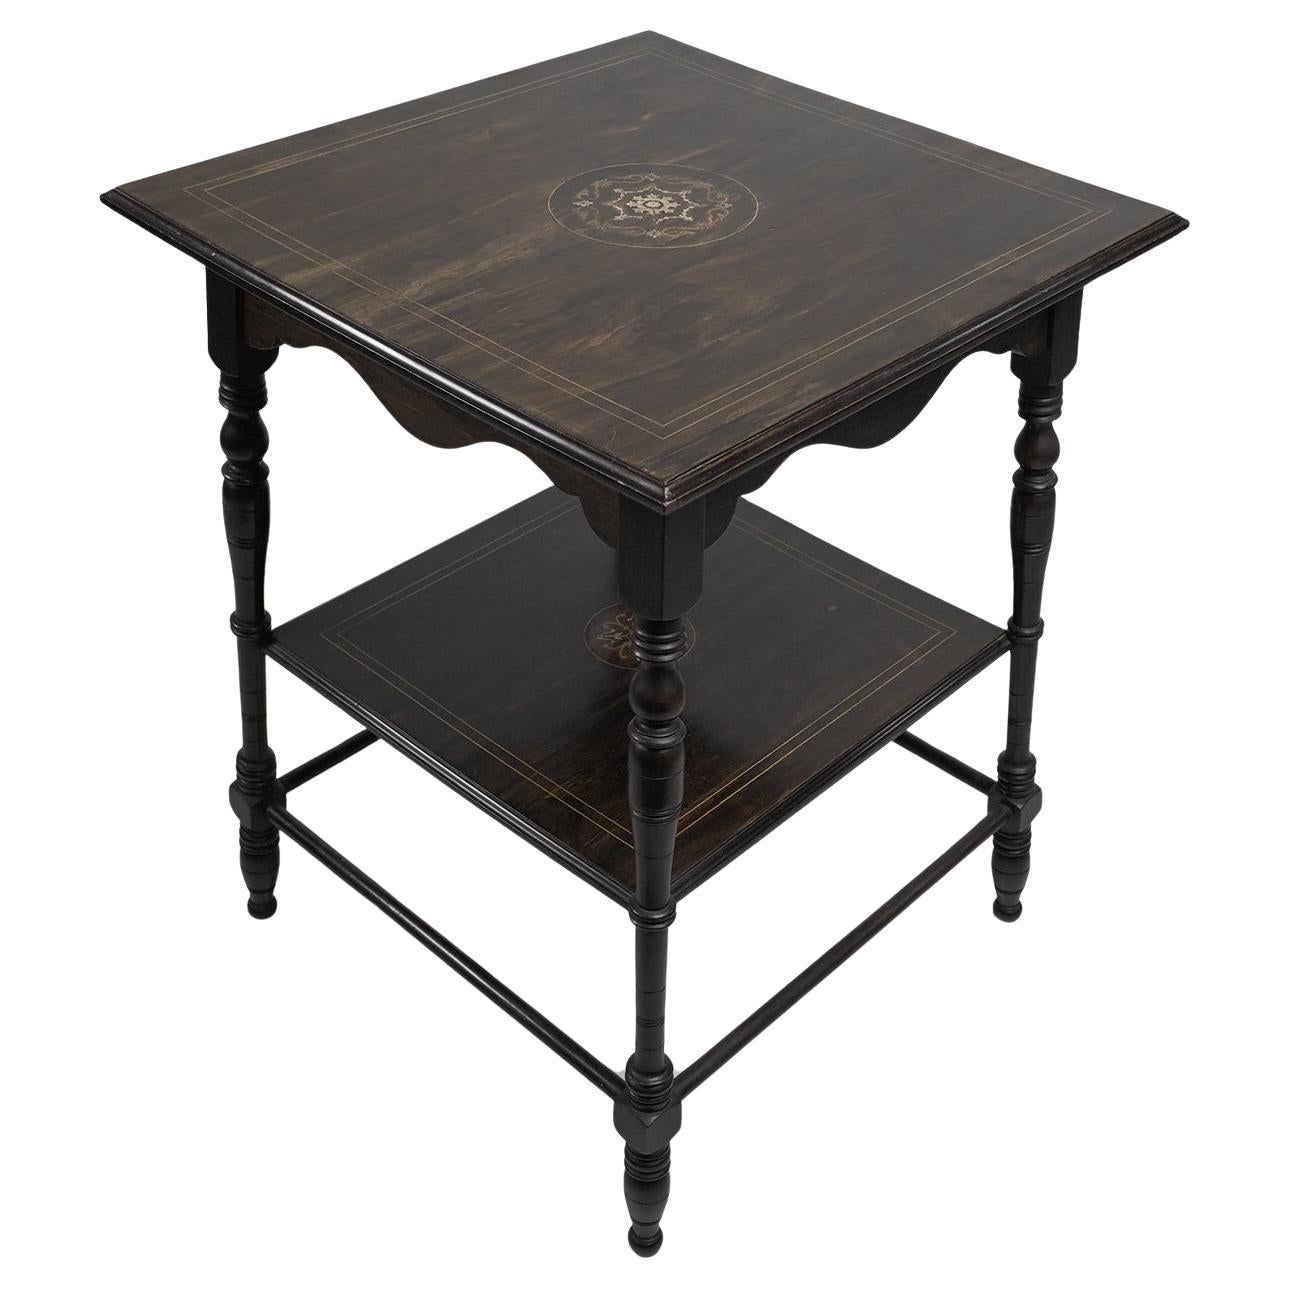 An Aesthetic Movement rosewood two tier side table inlaid with floral decoration